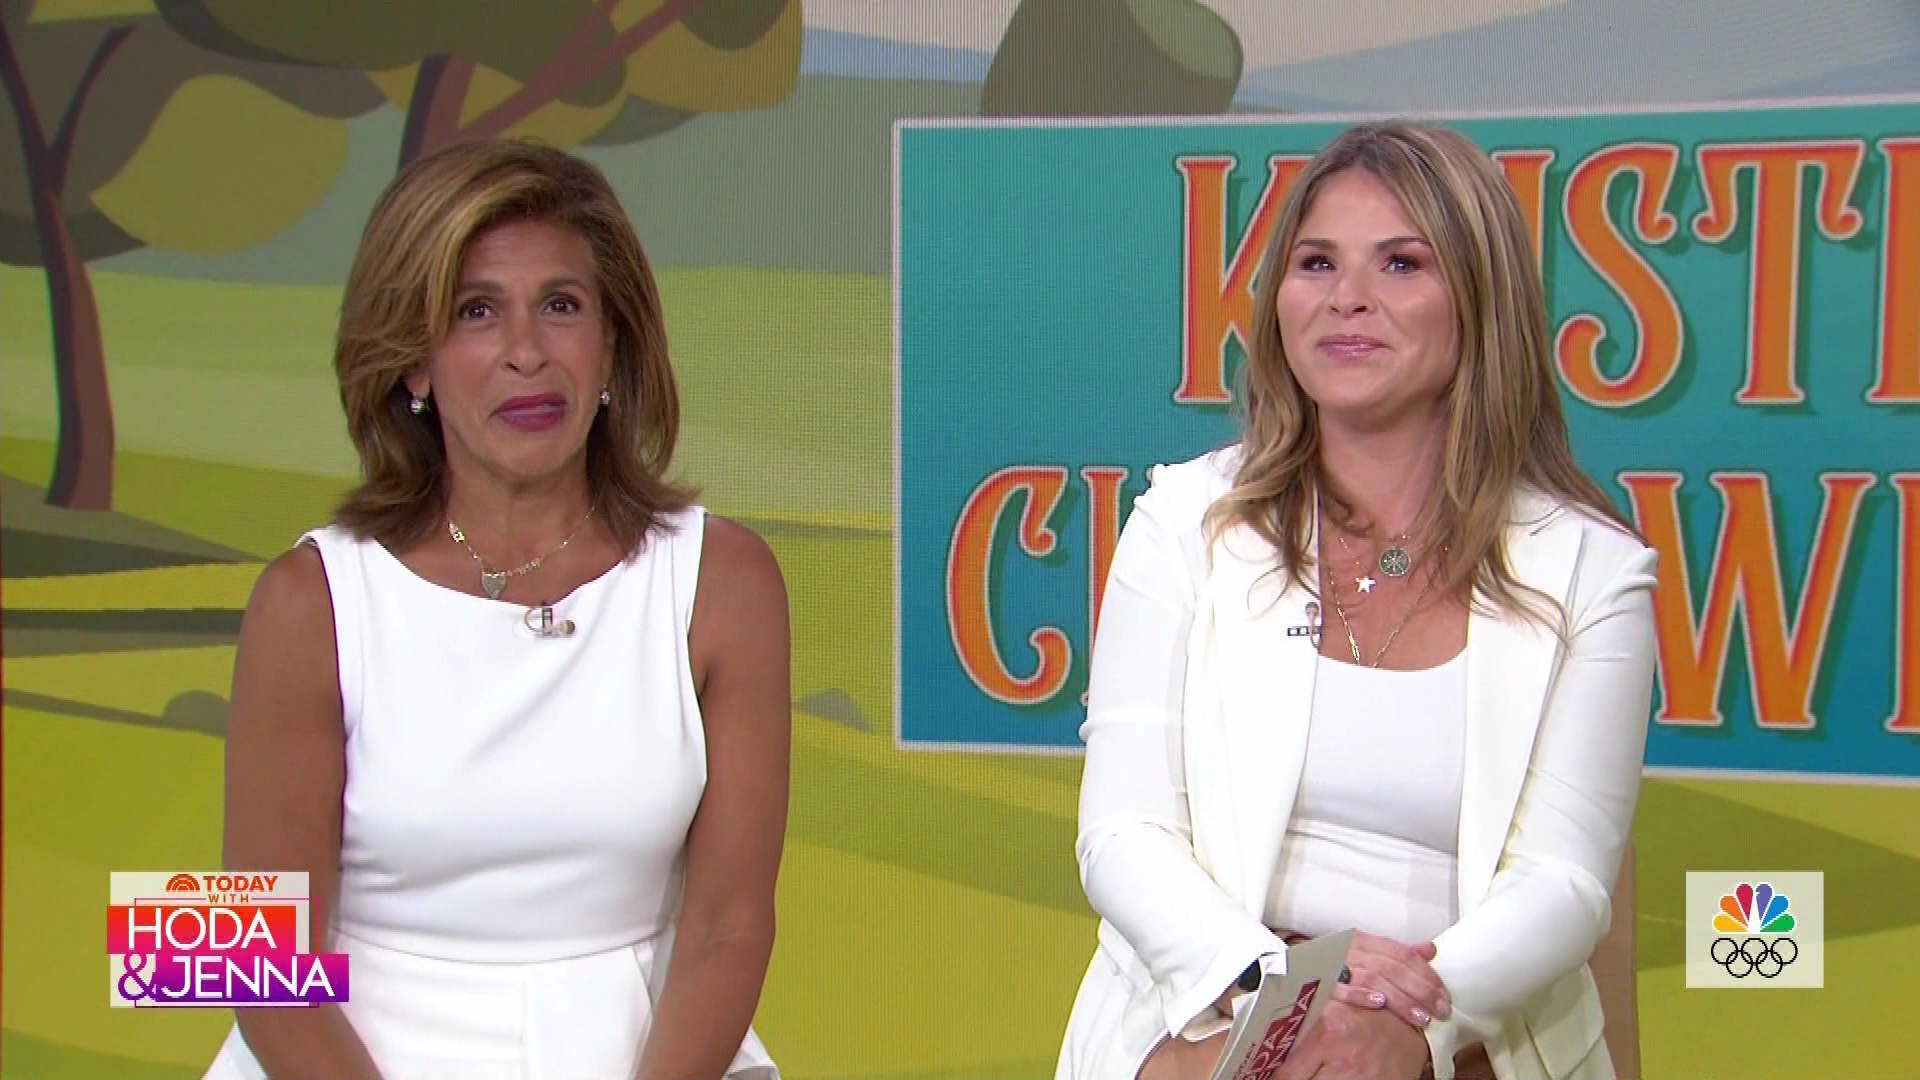 Today With Hoda & Jenna S2021E140 2021-07-16-1000 (08).png